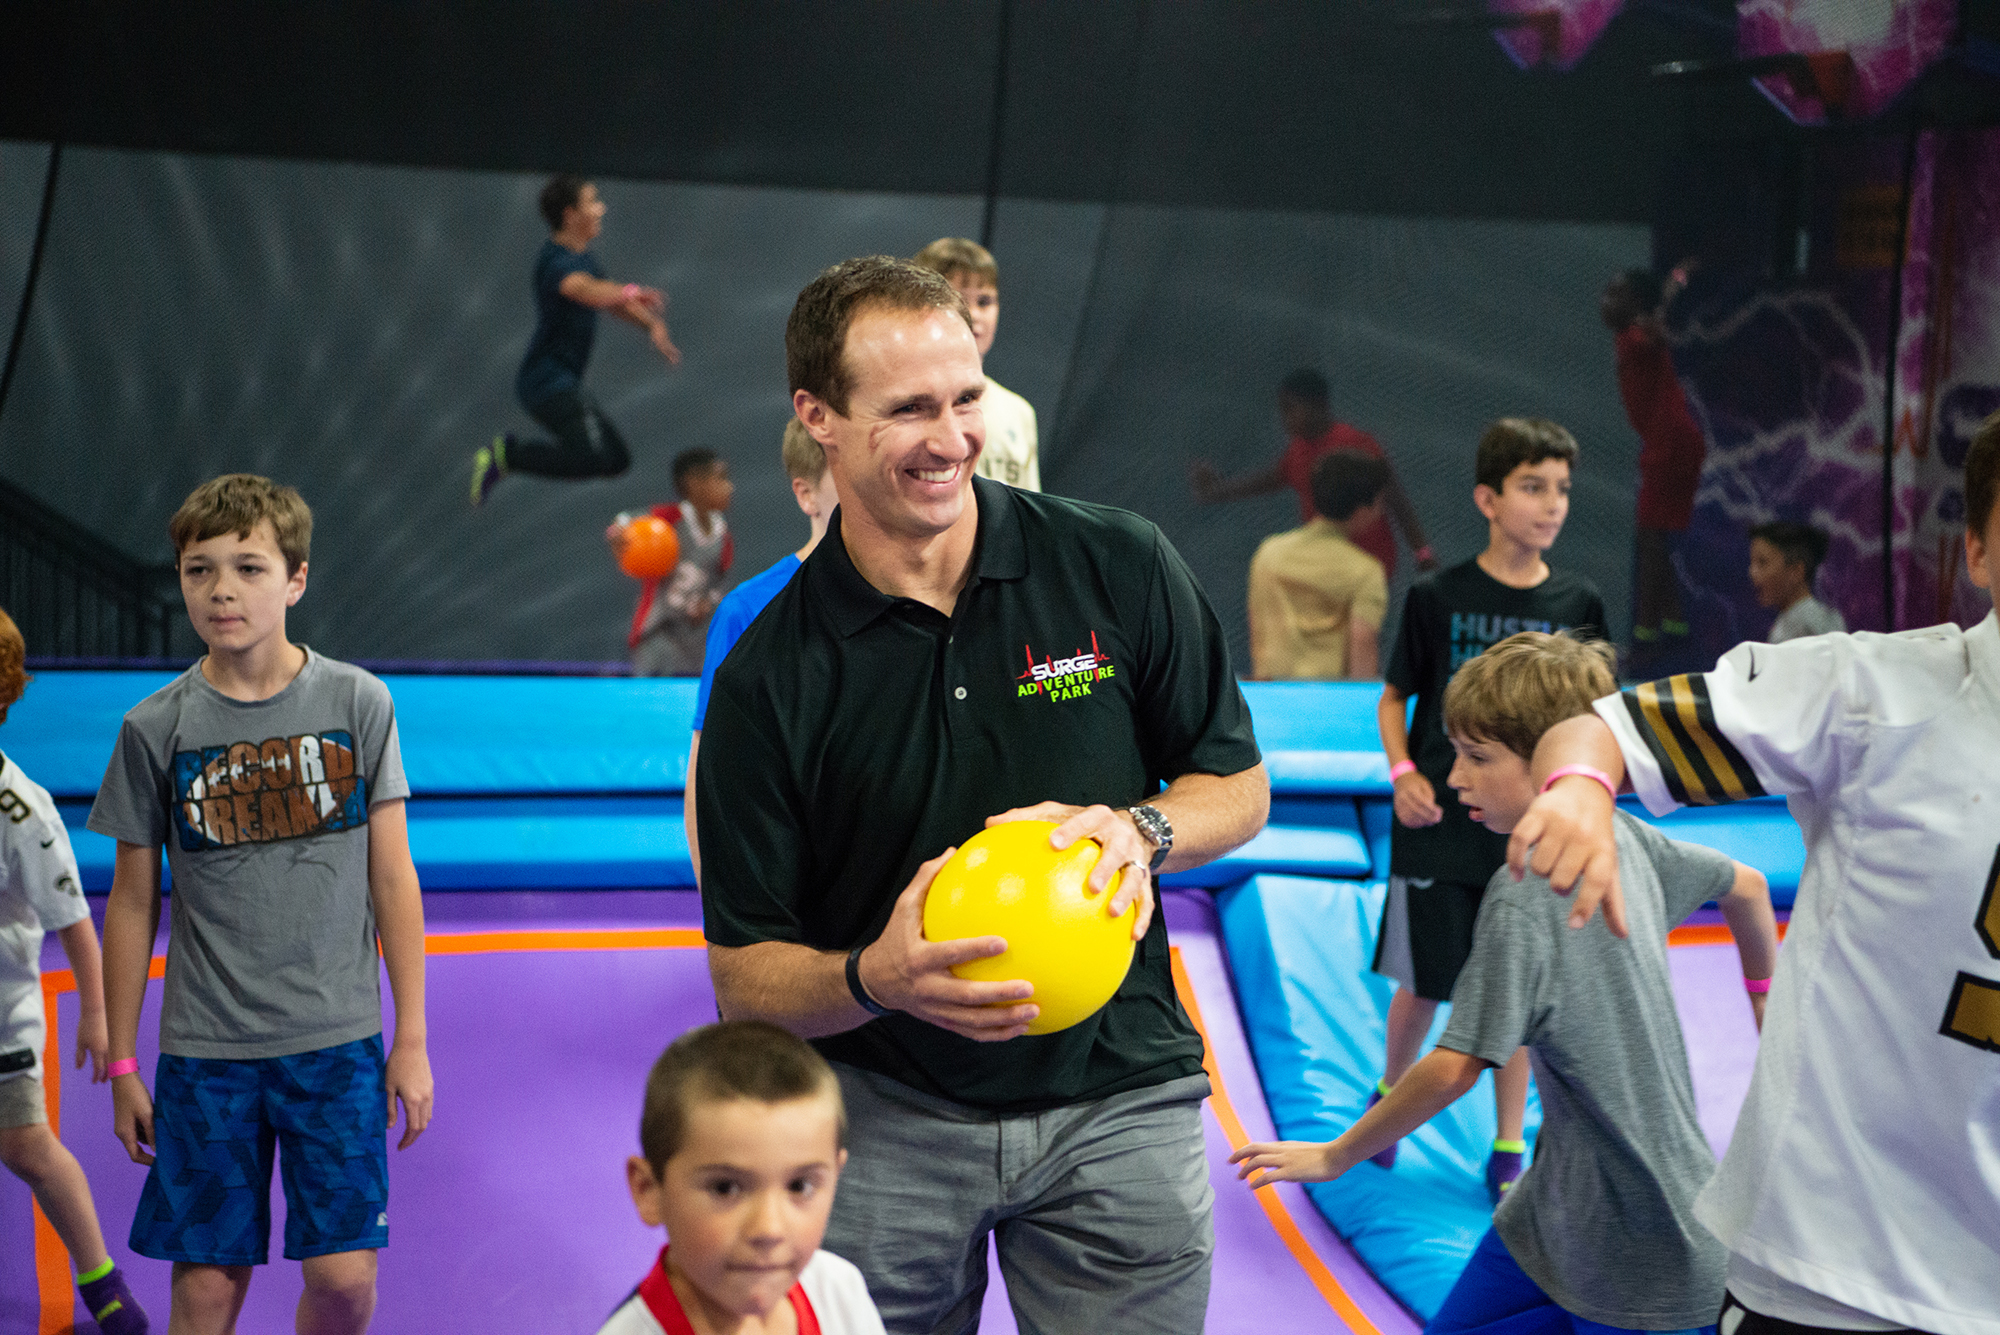 New Orleans Saints quarterback Drew Brees expects his Surge Adventure Park to open in Jacksonville any day now.